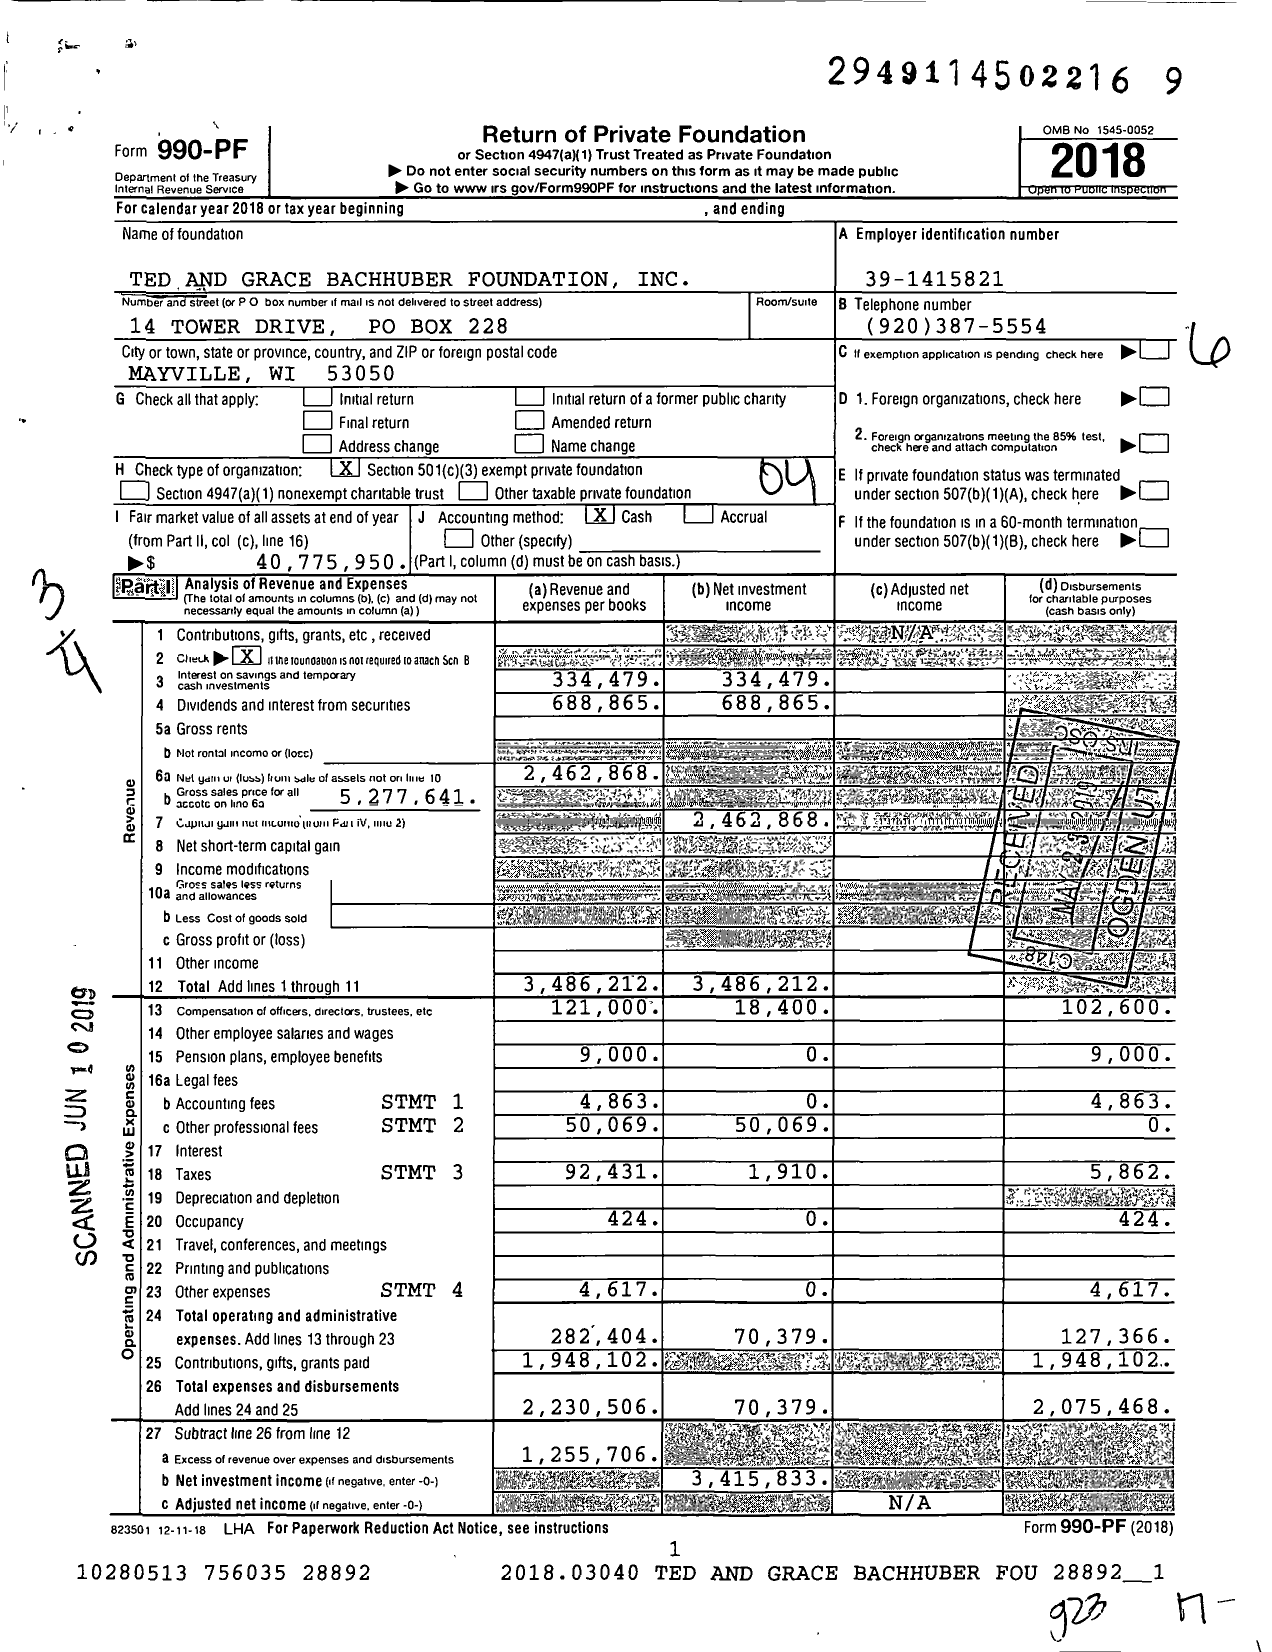 Image of first page of 2018 Form 990PF for Ted and Grace Bachhuber Foundation